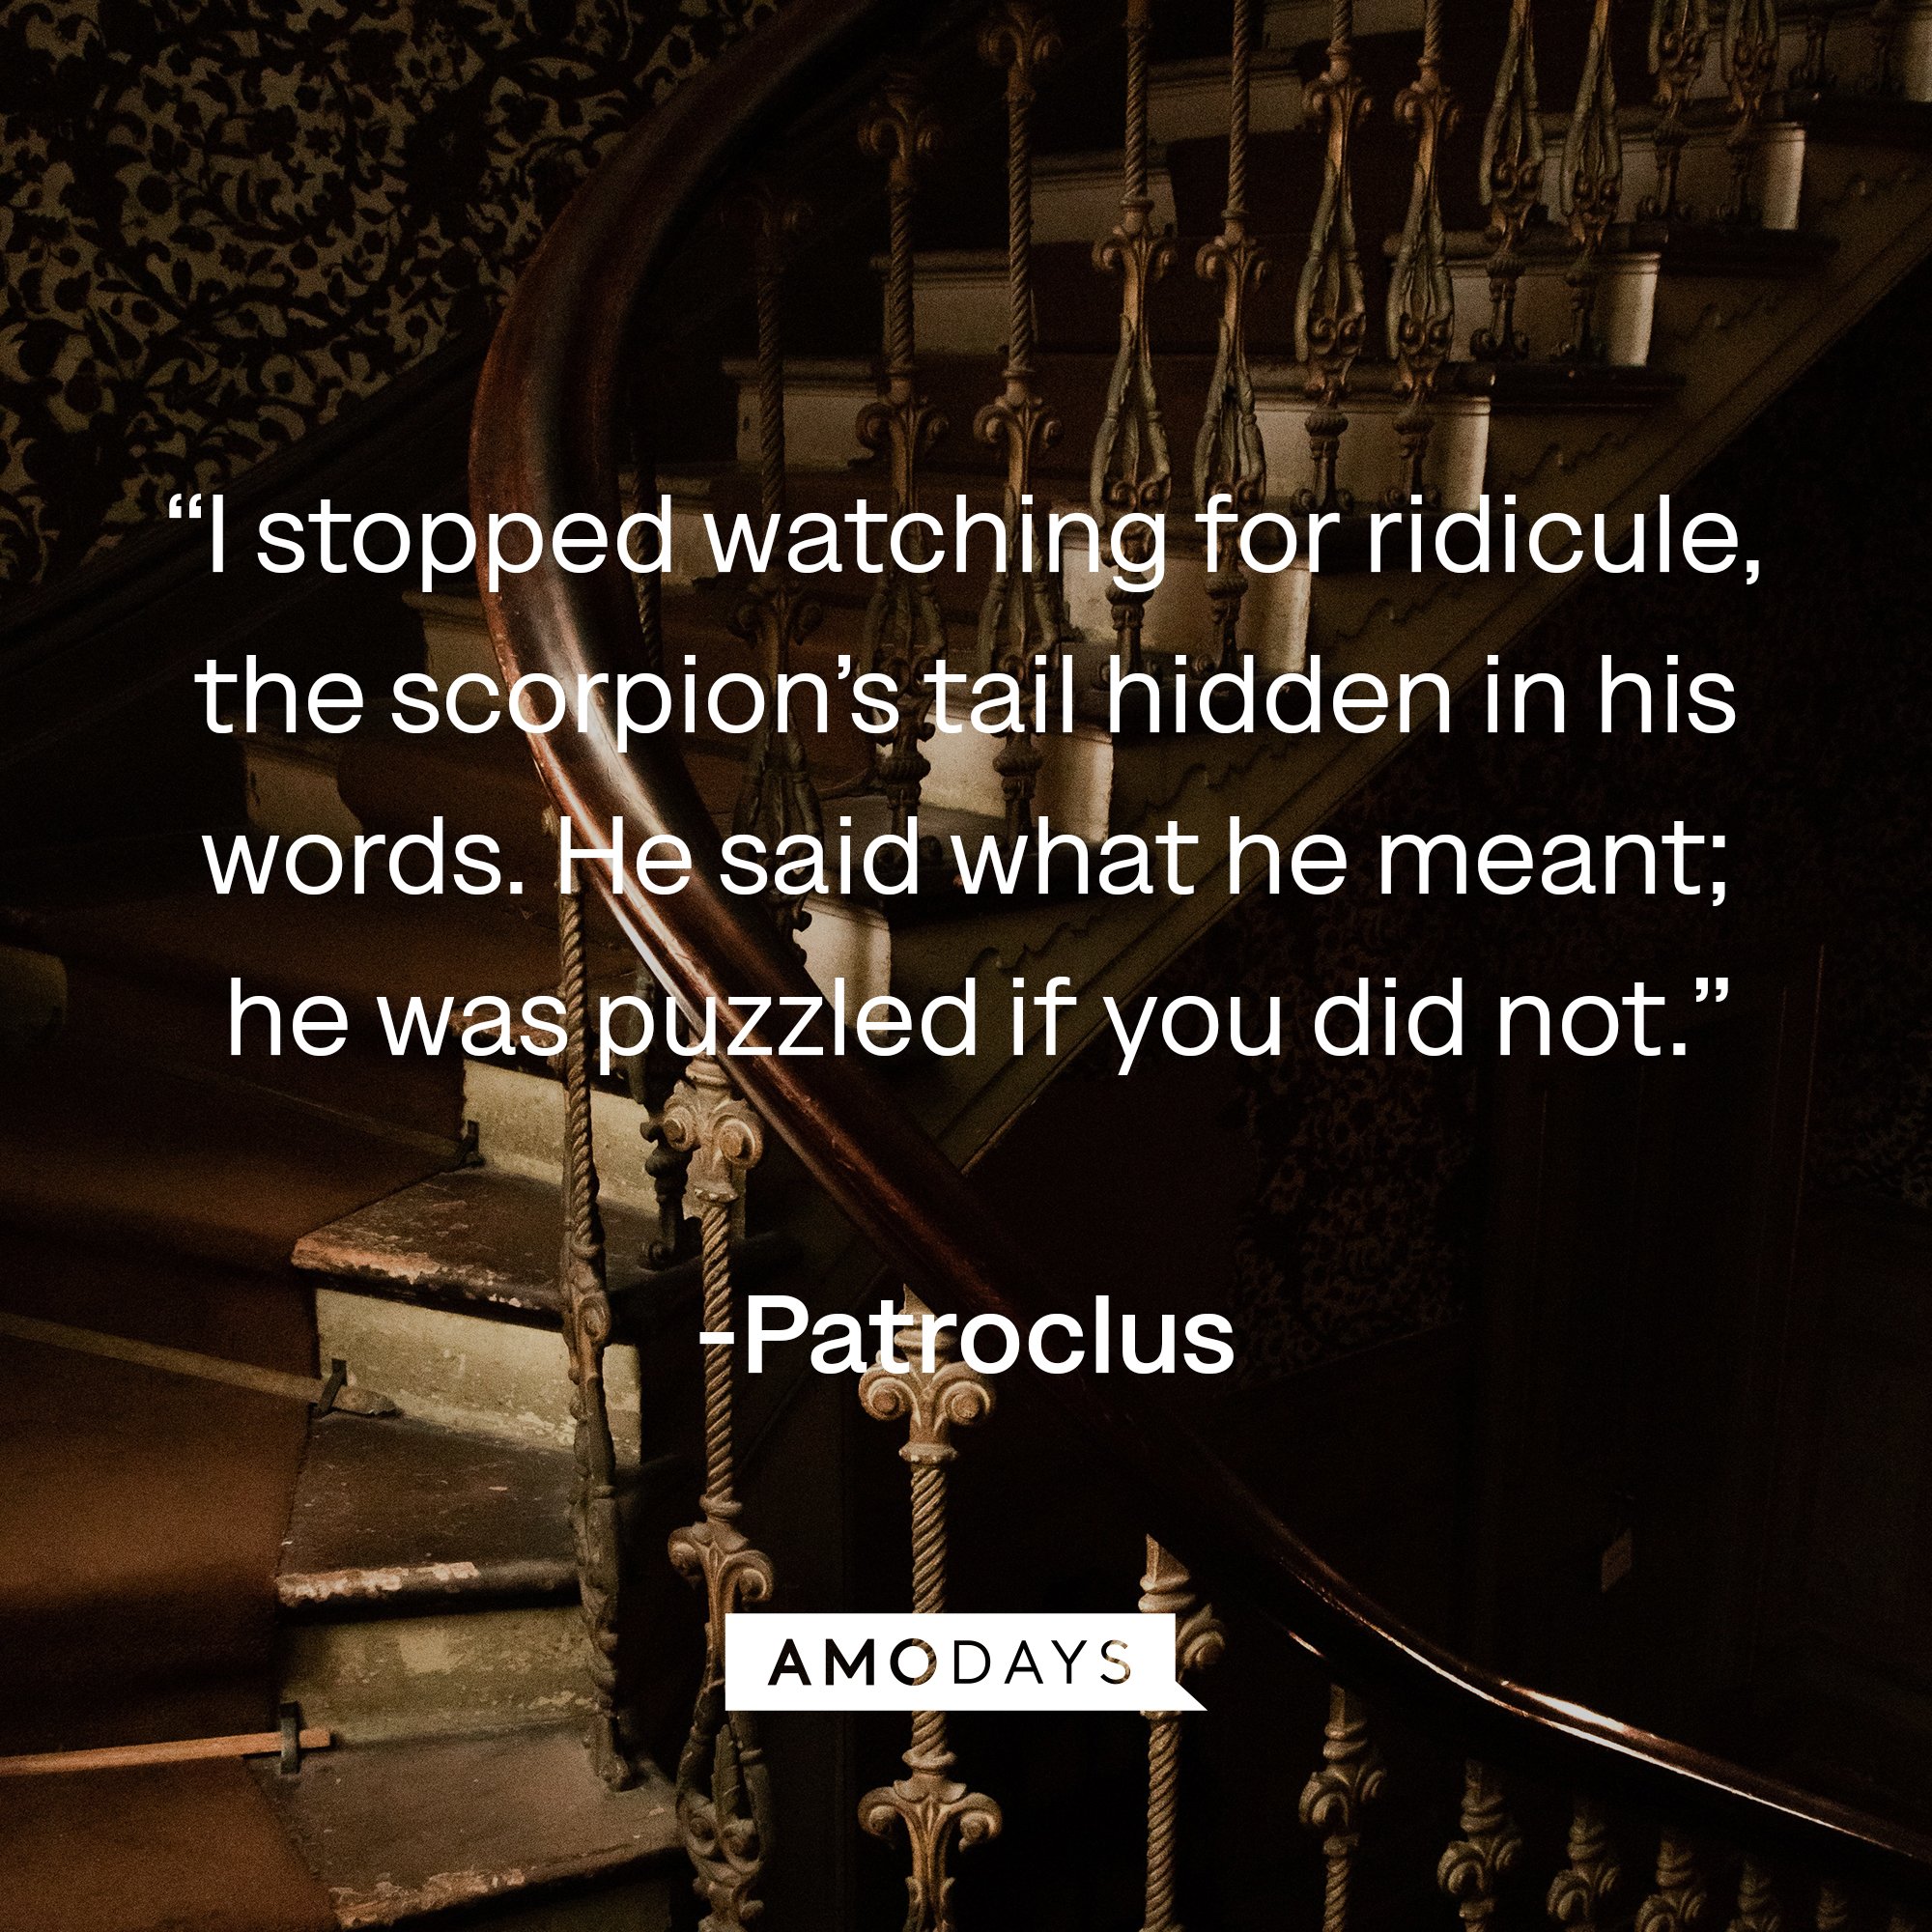  Patroclus's quote: “I stopped watching for ridicule, the scorpion’s tail hidden in his words. He said what he meant; he was puzzled if you did not.” | Image: AmoDays